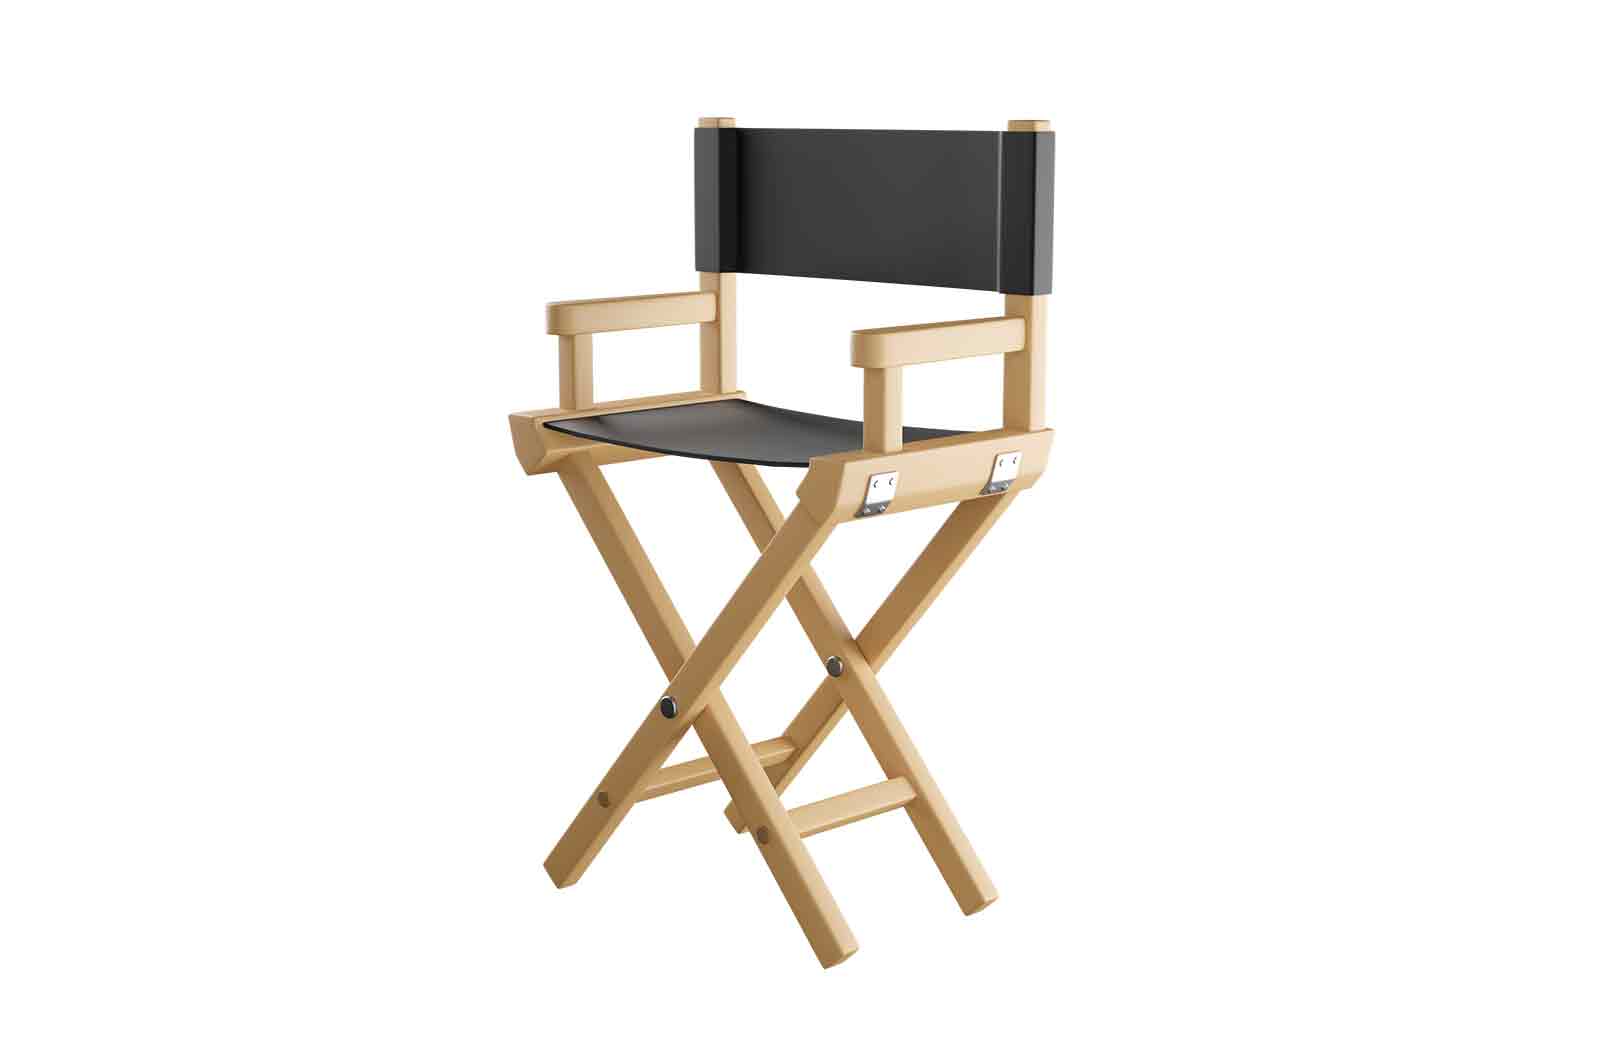 Director movie chair 3d rendered illustration on white background. Cinema production, film studio, movie entertainment and cinematography industry